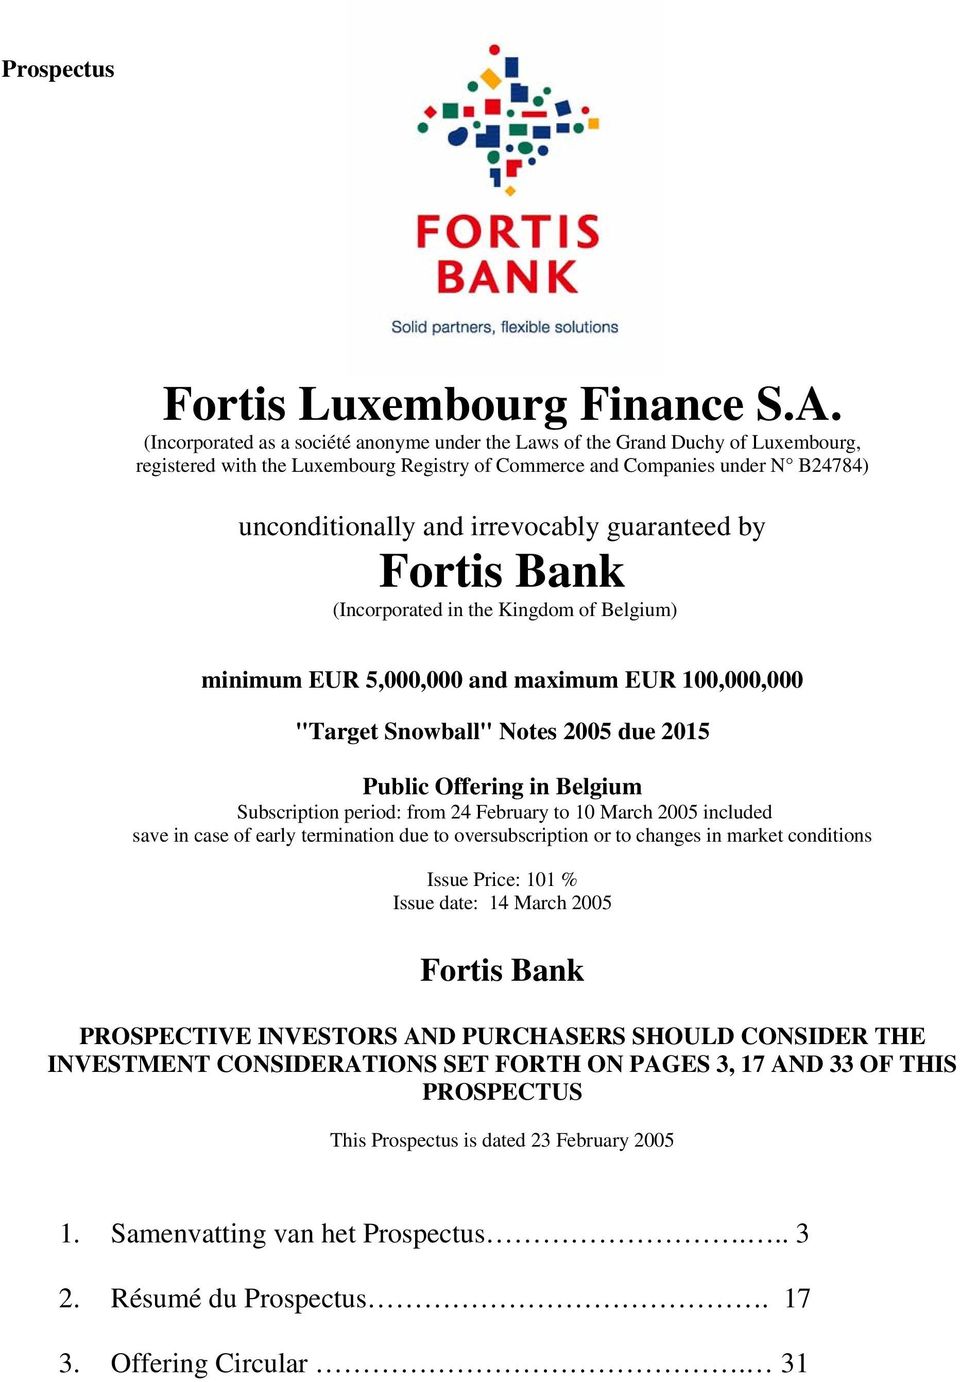 guaranteed by Fortis Bank (Incorporated in the Kingdom of Belgium) minimum EUR 5,000,000 and maximum EUR 100,000,000 "Target Snowball" Notes 2005 due 2015 Public Offering in Belgium Subscription